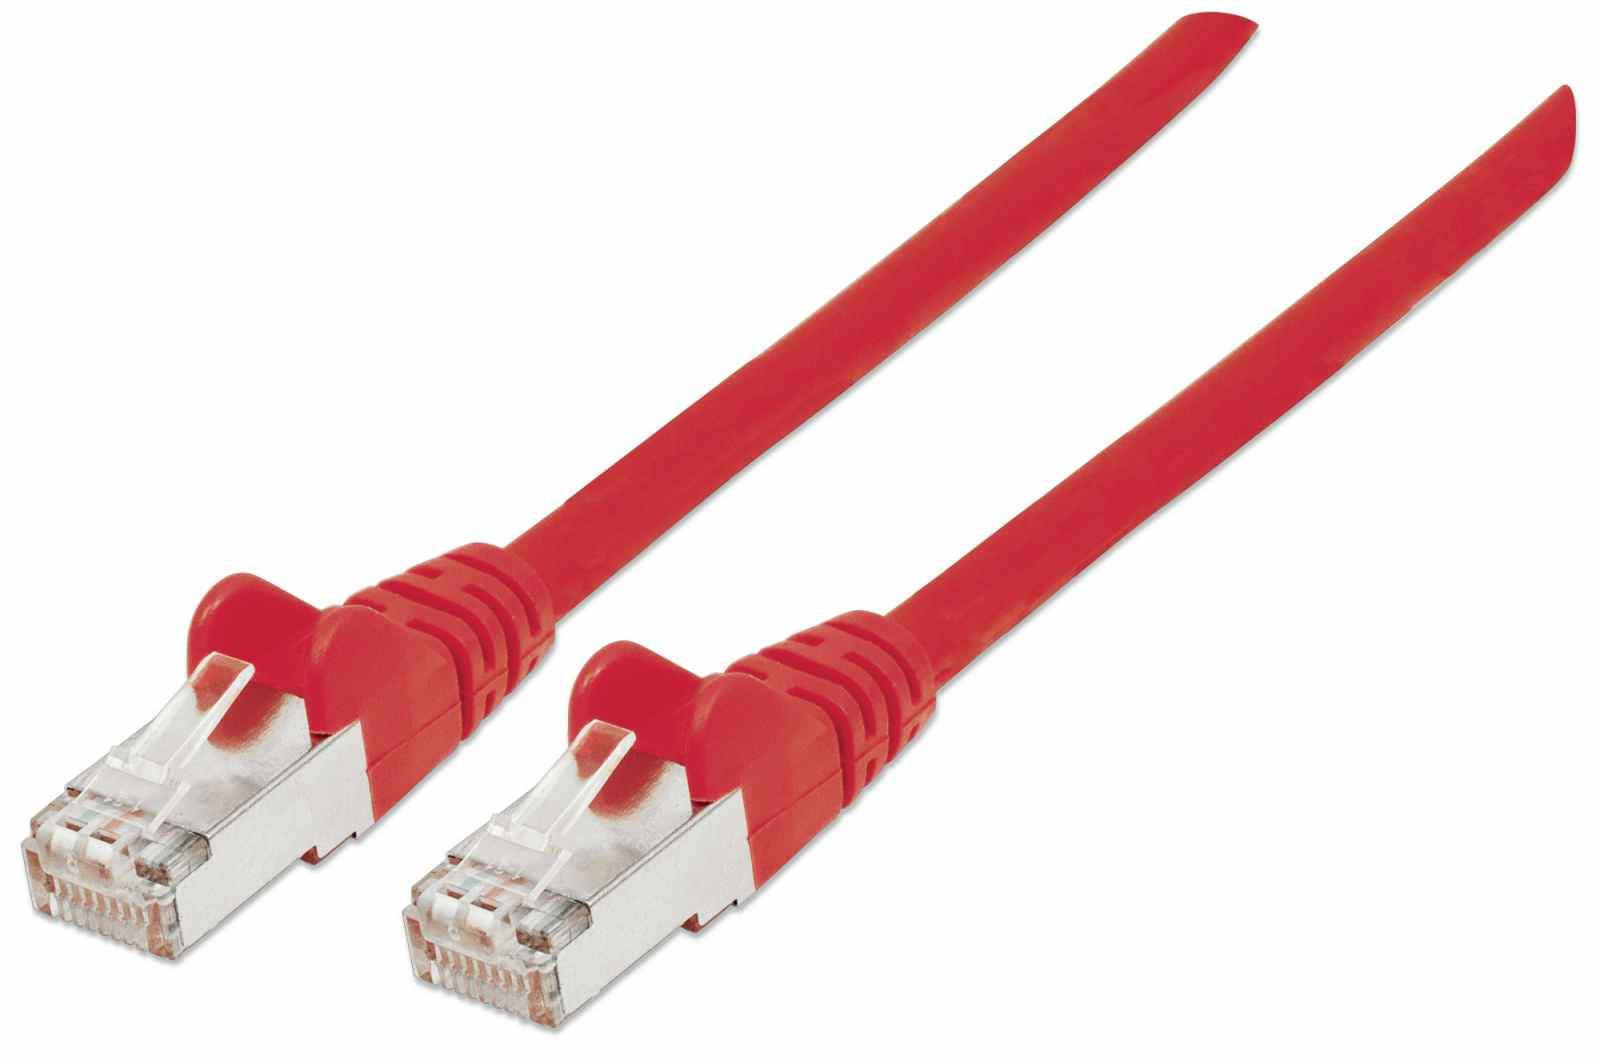 Intellinet Network Patch Cable, Cat7 Cable/Cat6A Plugs, 2m, Red, Copper, S/FTP, LSOH / LSZH, PVC, RJ45, Gold Plated Contacts, Snagless, Booted, Lifetime Warranty, Polybag